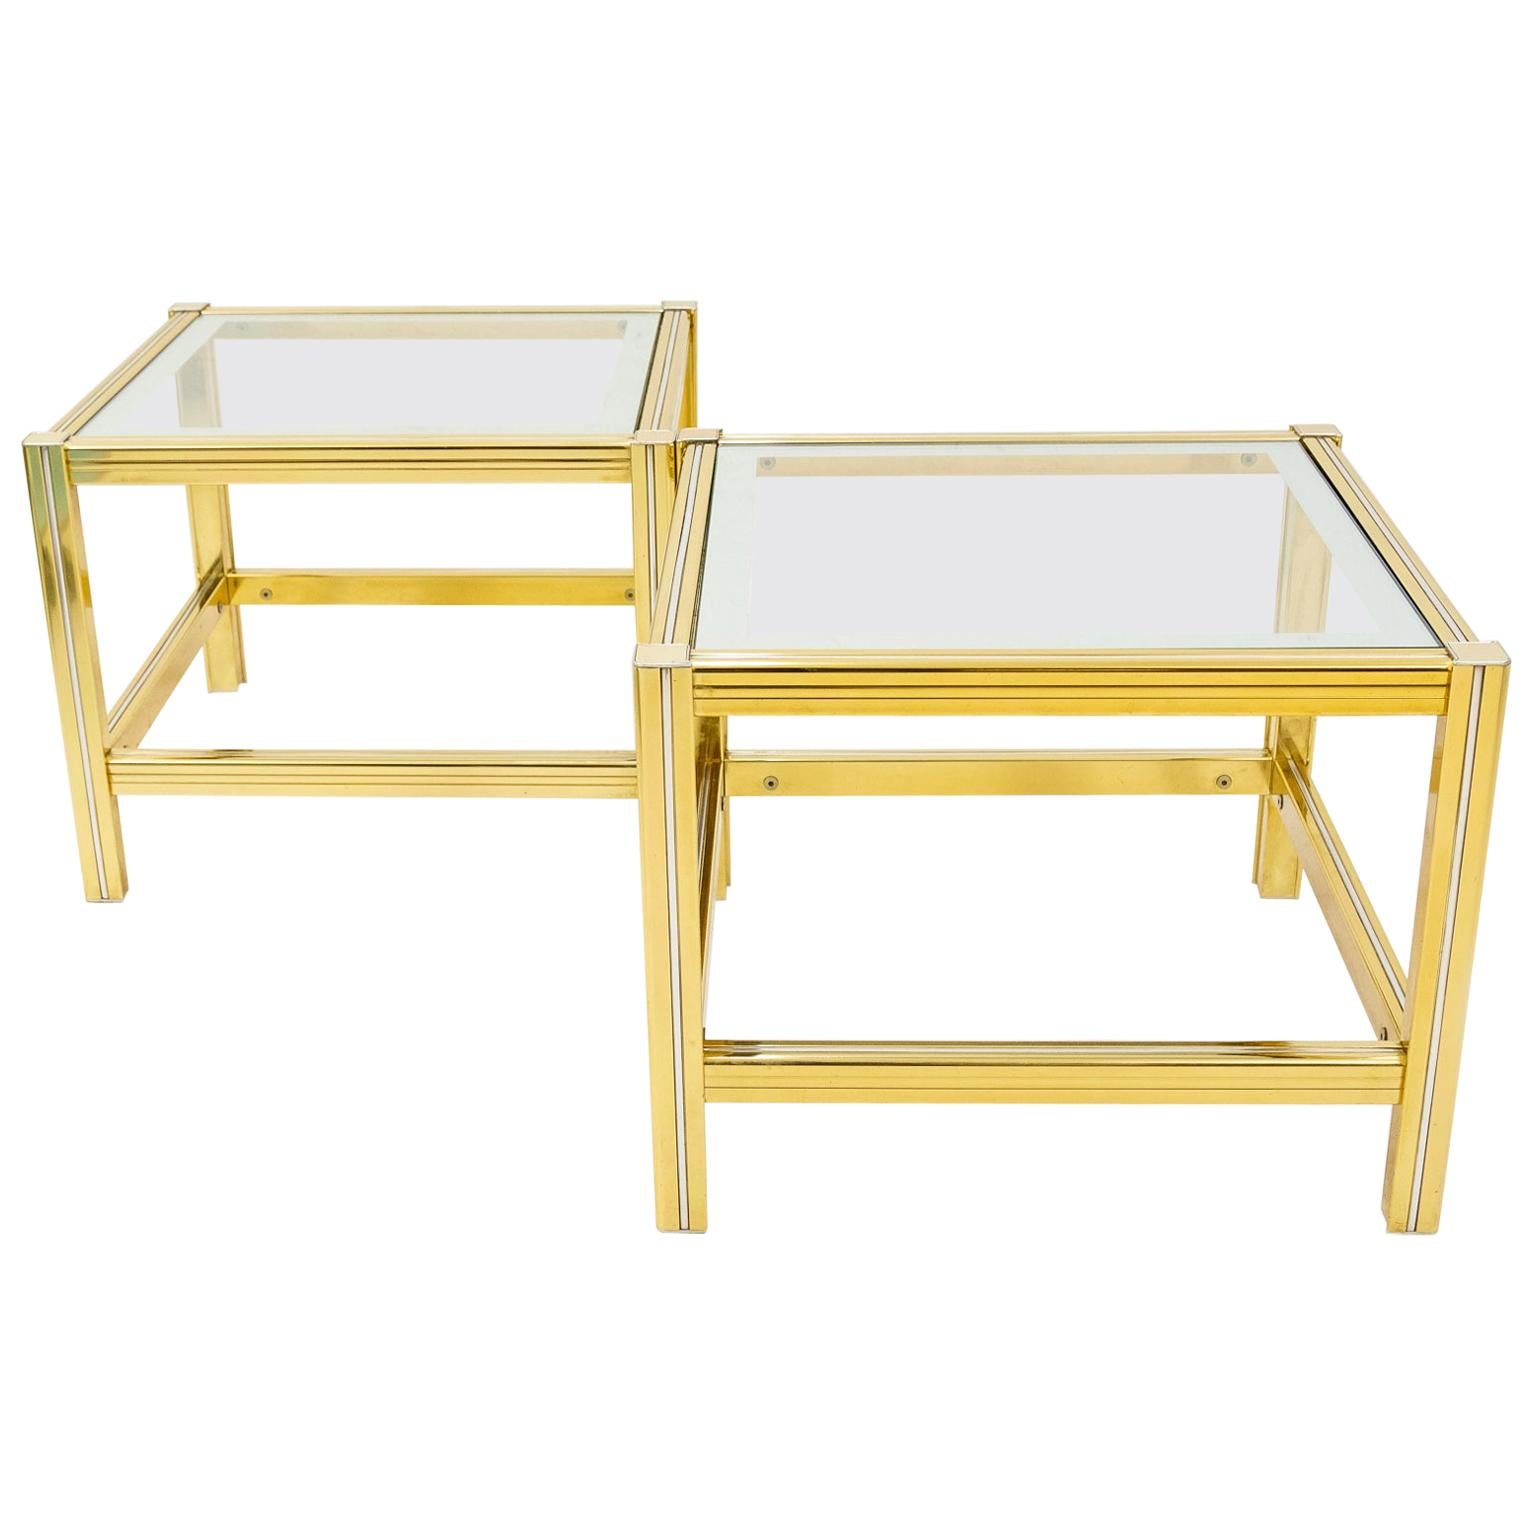 2 Brass and Glass Side Tables, France, 1970s